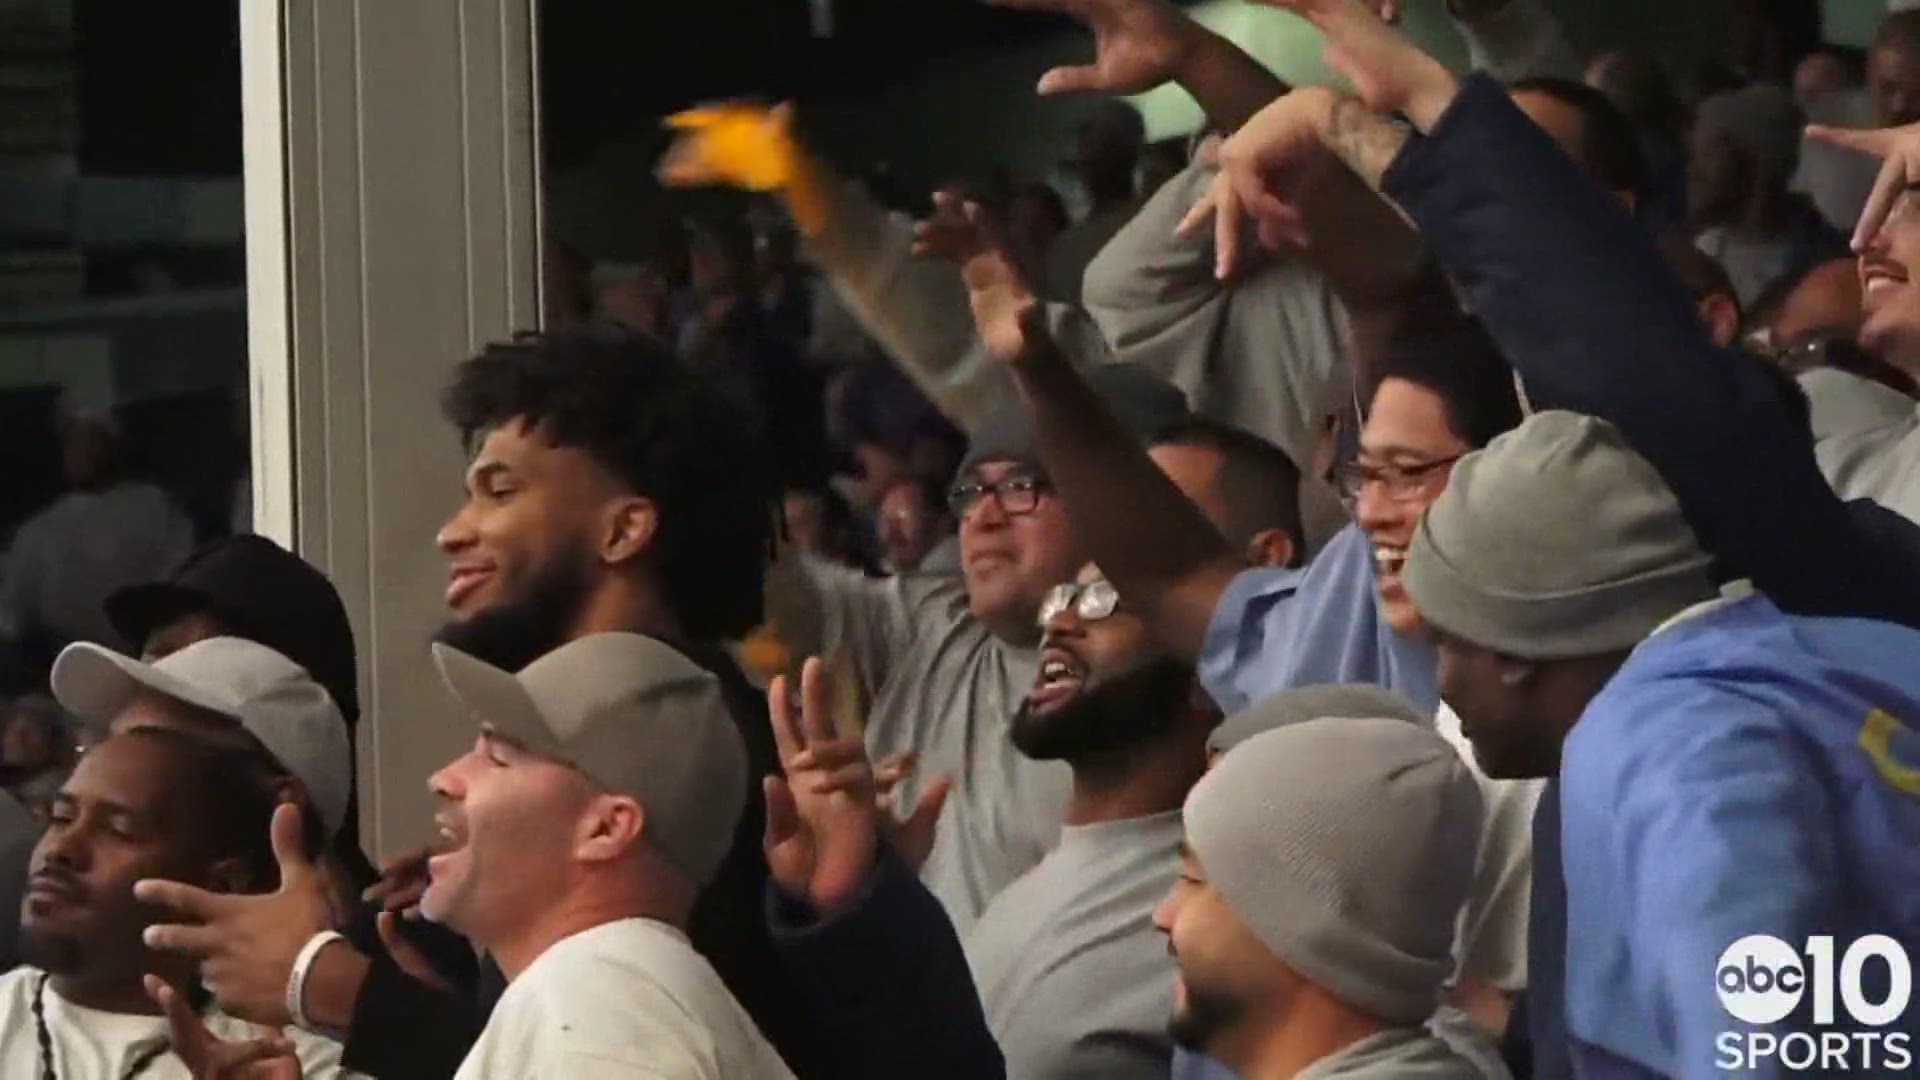 Members of the Sacramento Kings went inside the gates of Folsom State Prison to join incarcerated individuals for the 1st NBA 'Play for Justice' event.